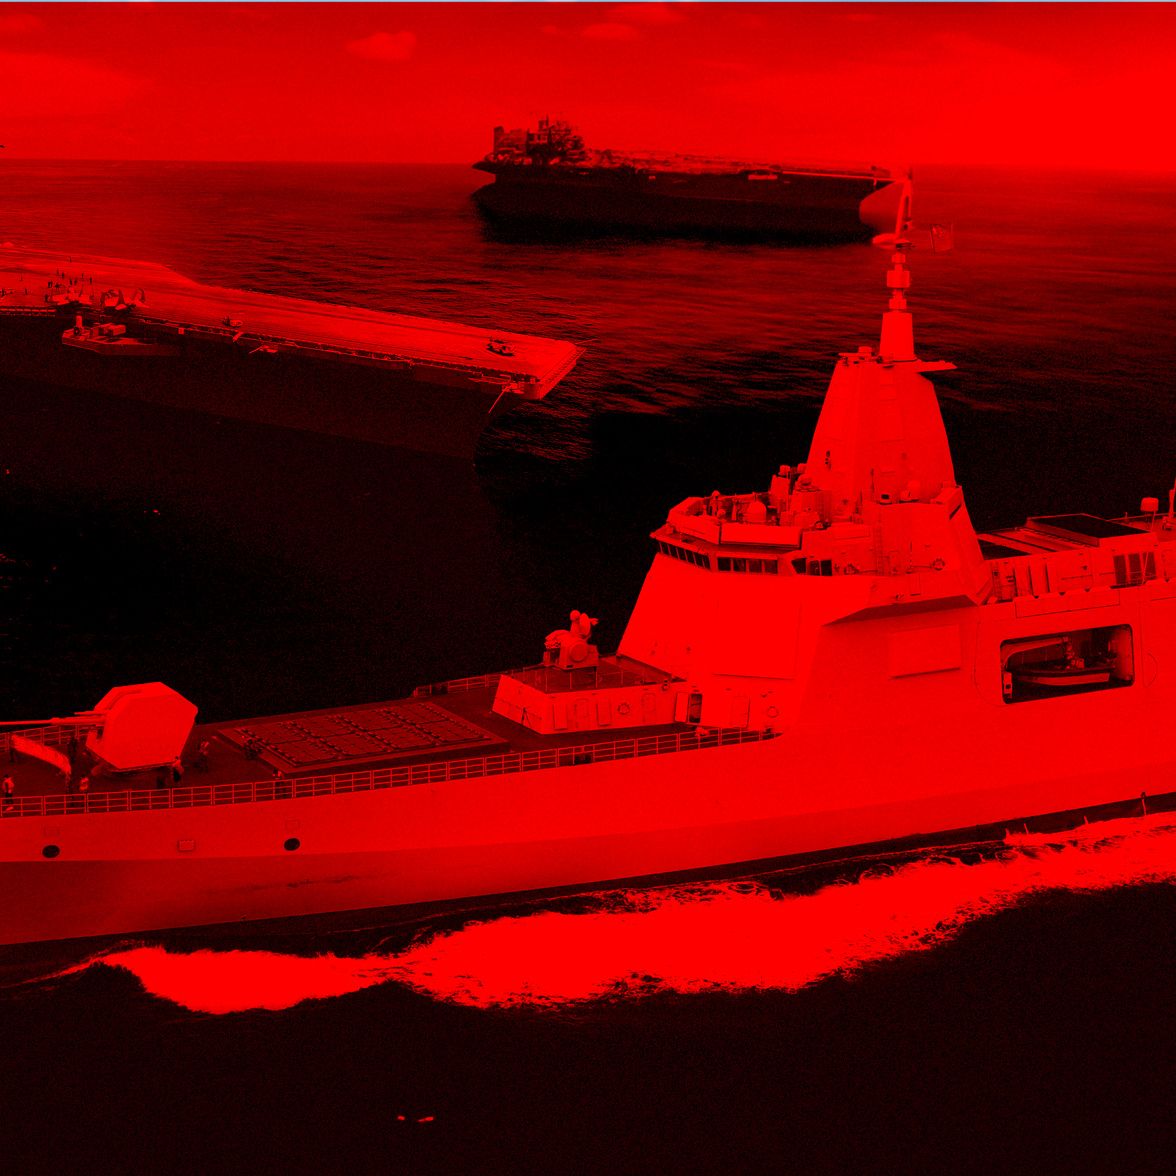 China Wants to Dominate the Seas—And Just Built a Terrifying New Aircraft Carrier